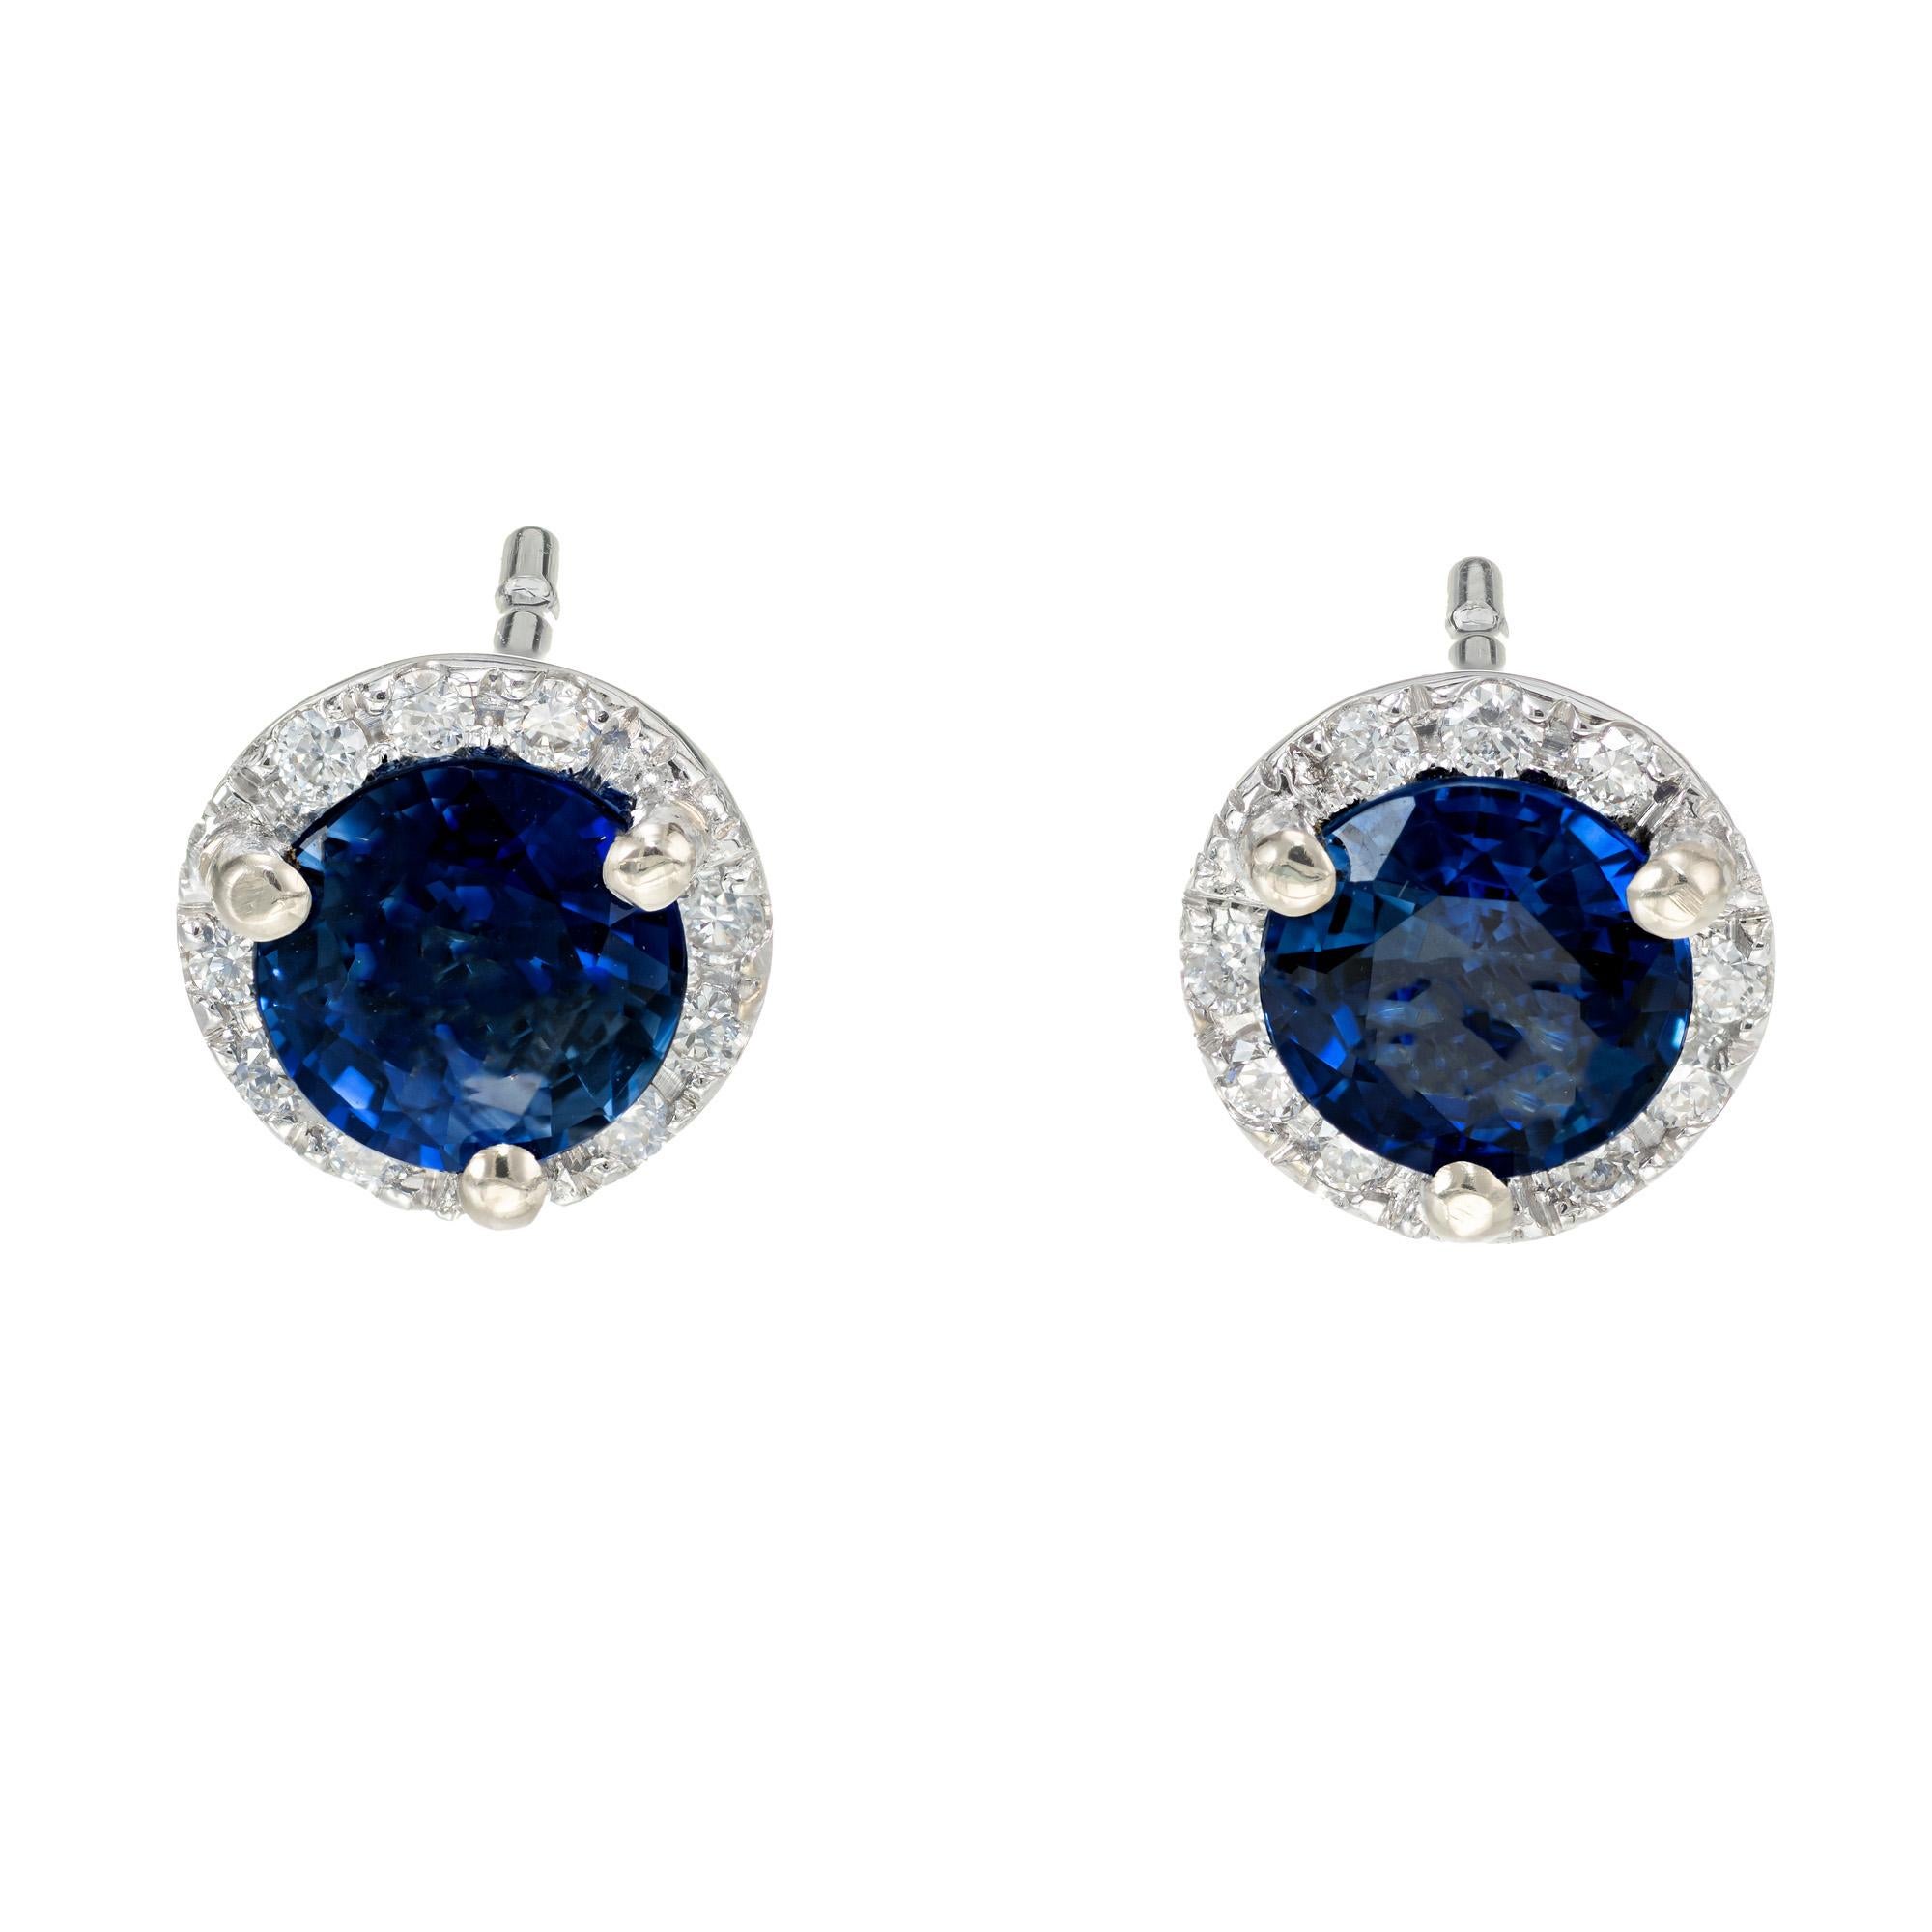 Blue Ceylon sapphire diamond halo earrings in white gold settings  2 round sapphires approx. total weight .83cts. Each with a halo of round diamonds. Designed and crafted in the Peter Suchy workshop.

2 blue sapphire, approx. total weight .83cts
18